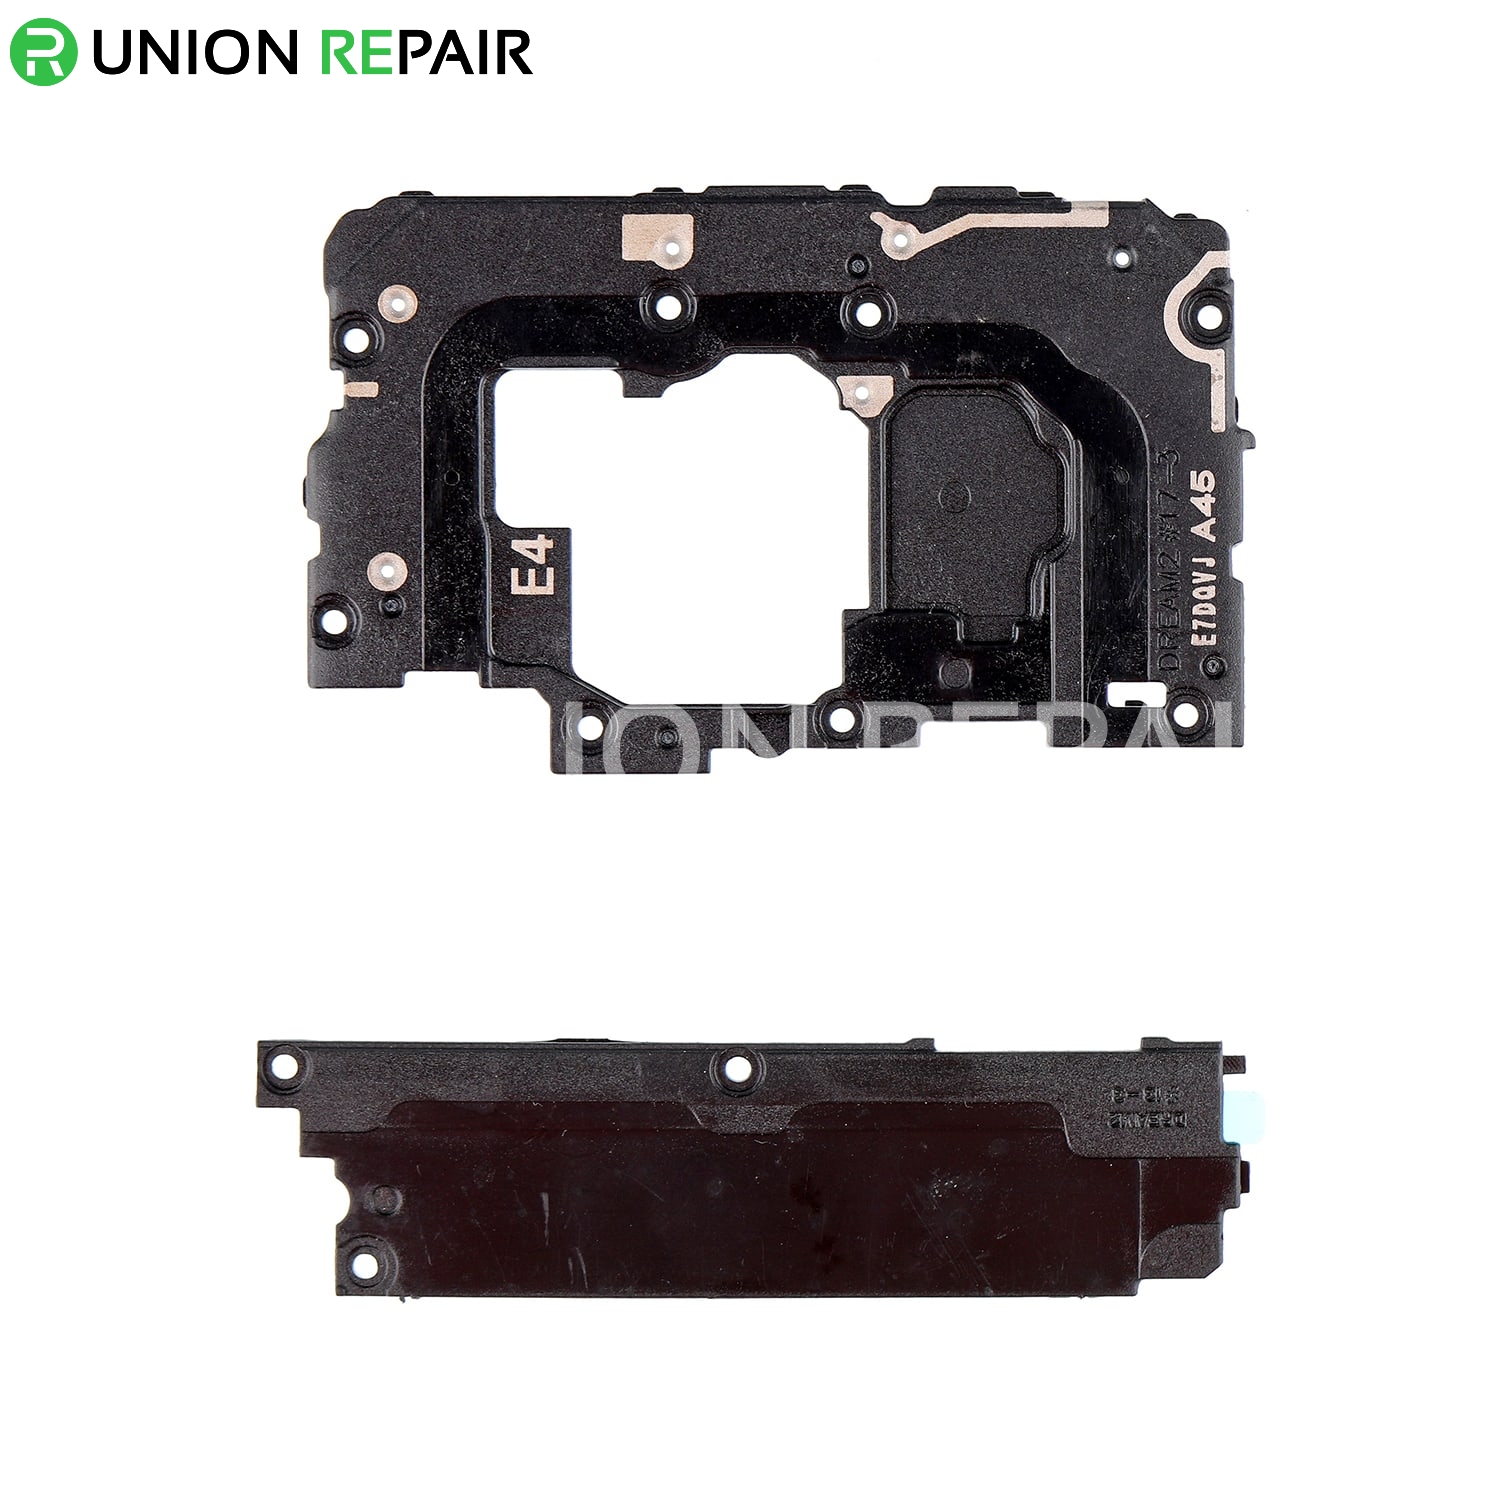 Replacement for Samsung Galaxy S8 Plus Mainboard Protective Housing